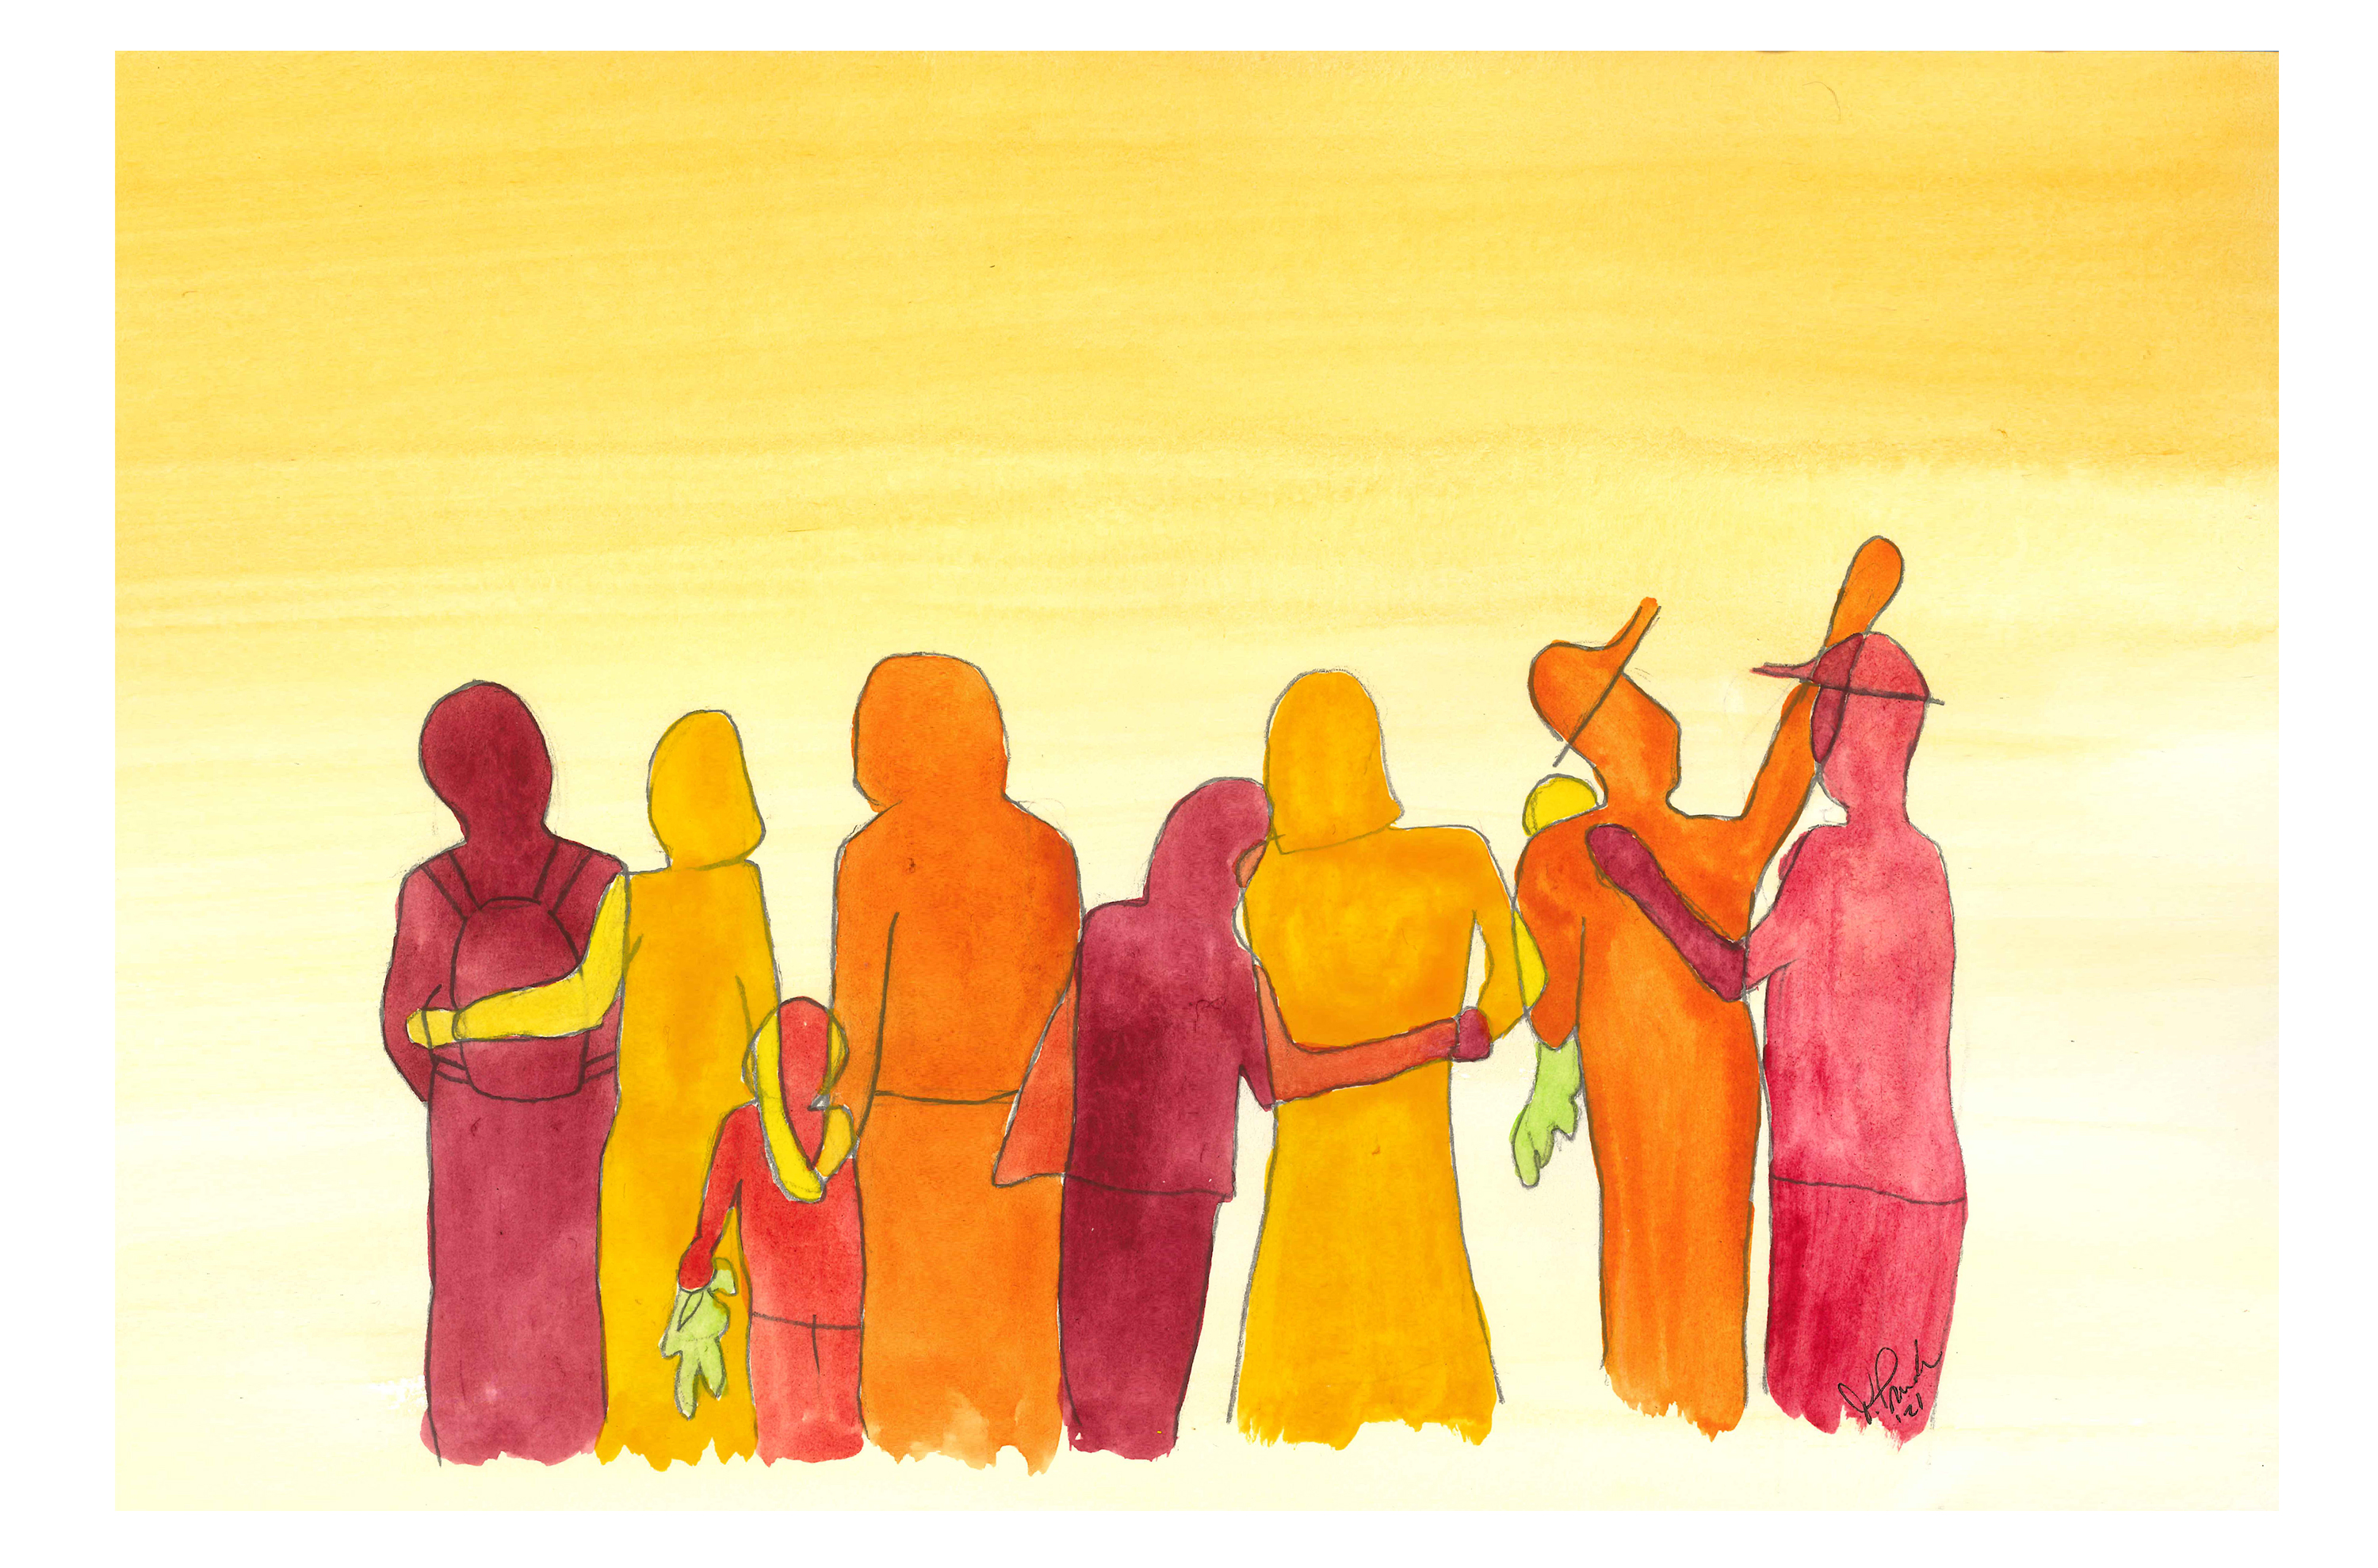 Illustation in ink and watercolor of people hugging and embracing